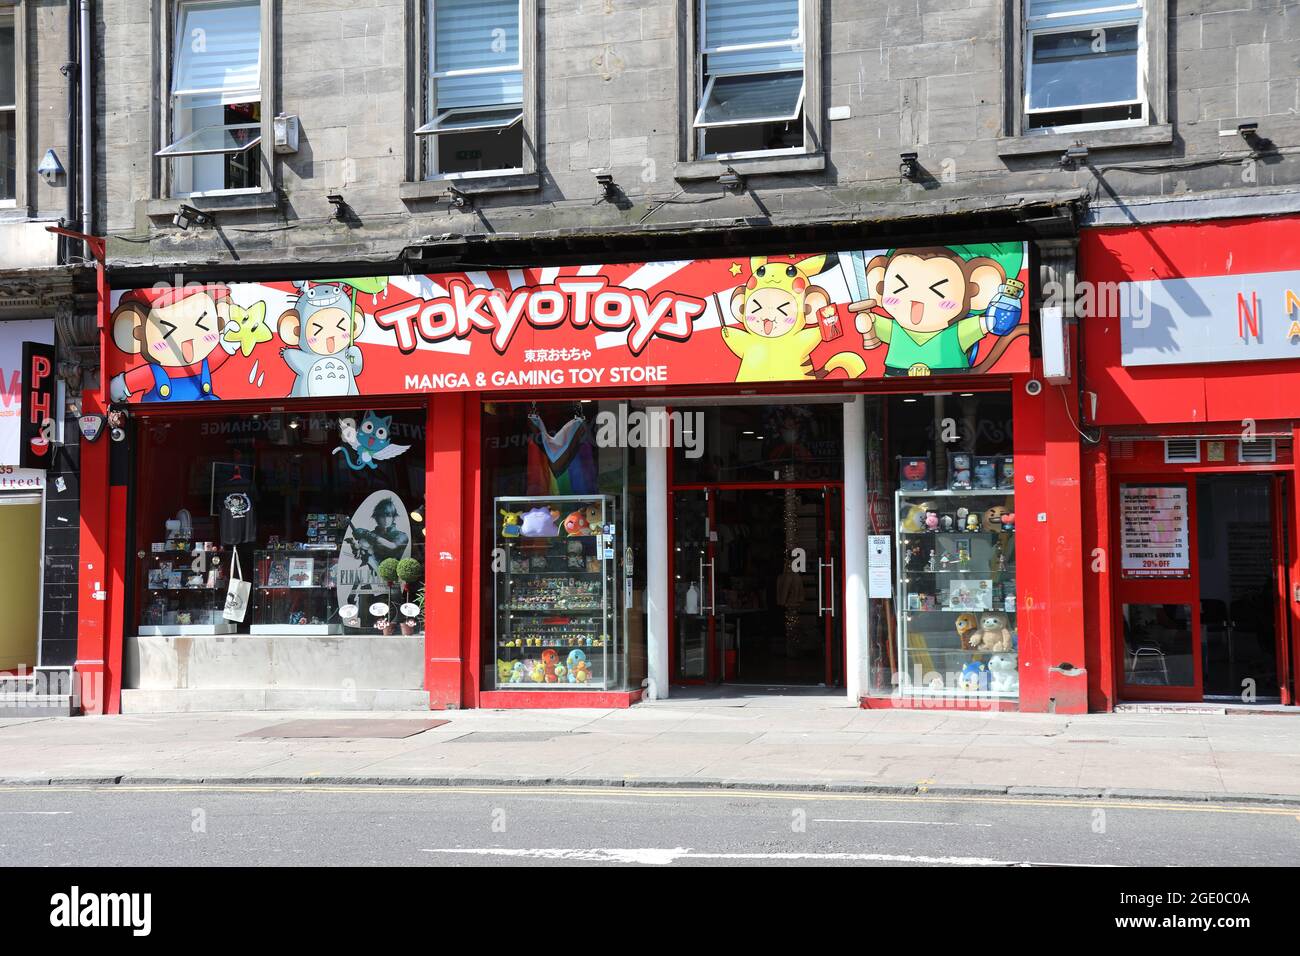 Tokyo Toys manga and gaming toy store in Glasgow Stock Photo